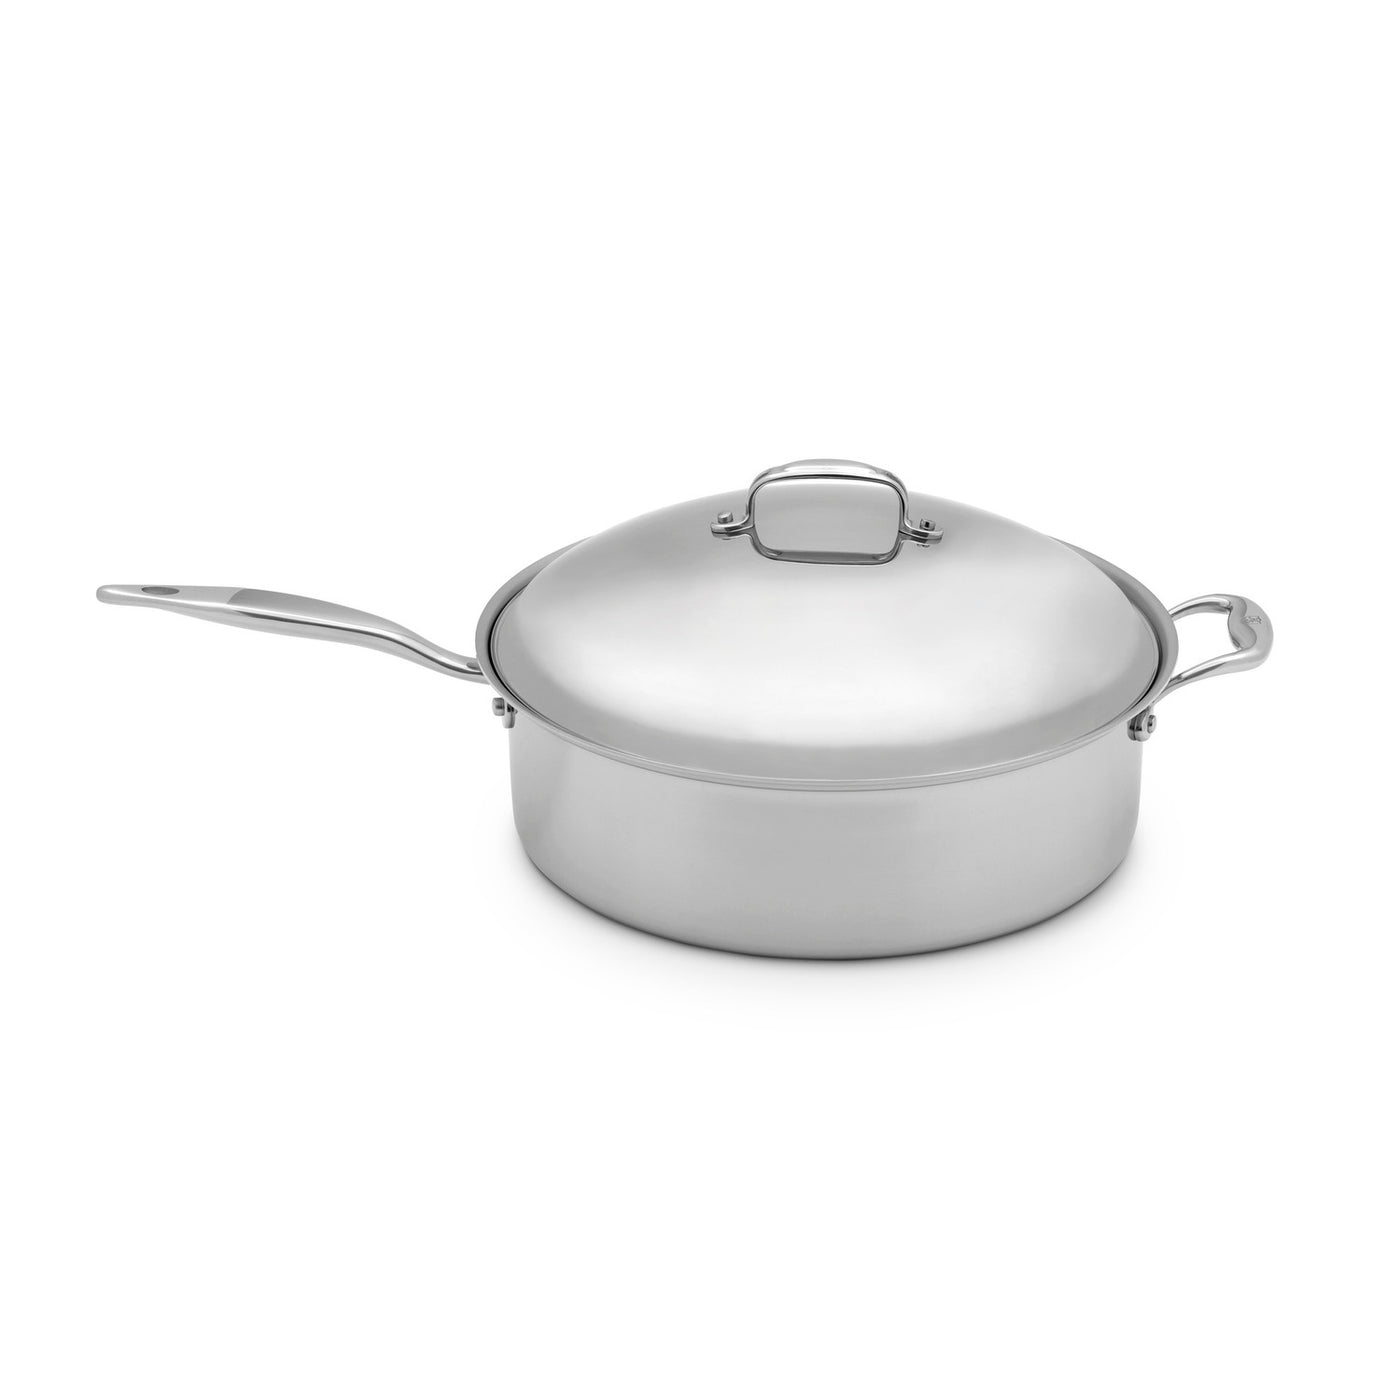 2.5 Qt. Stainless Steel Sauteuse with Lid, Heritage Steel